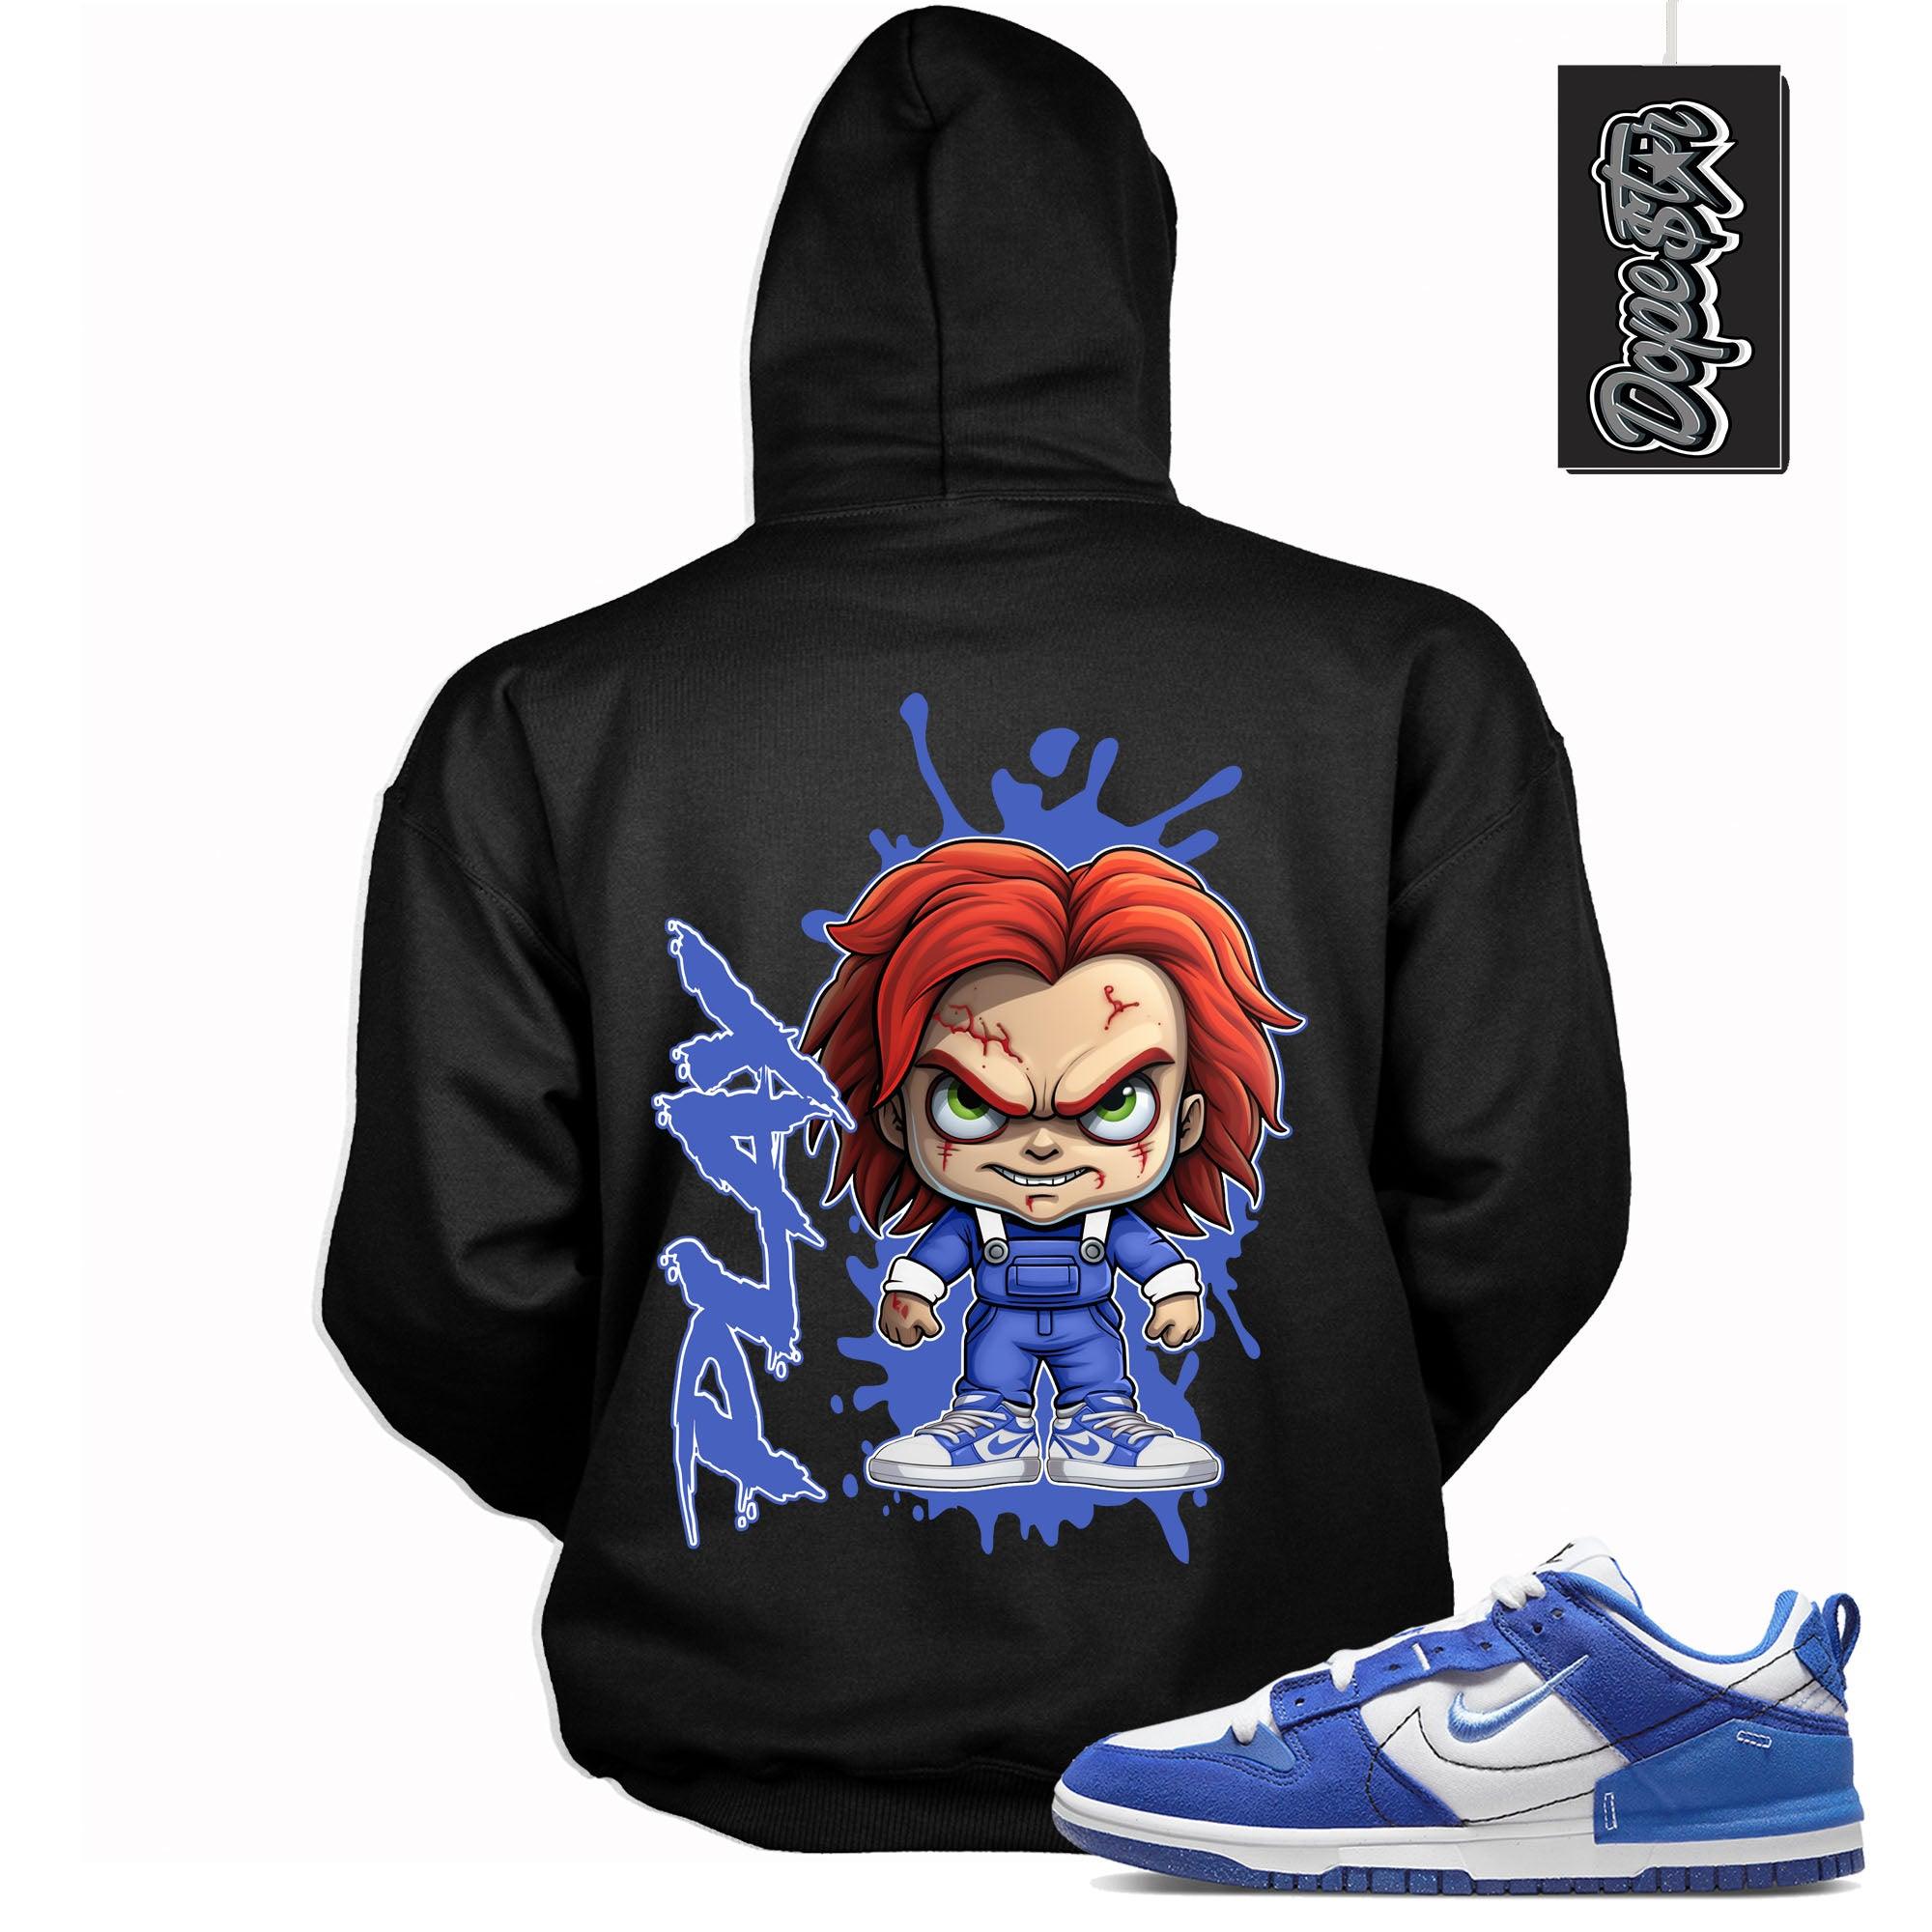 Cool Black Graphic Hoodie with “ CHUCKY PLAY “ print, that perfectly matches Nike Dunk Disrupt 2 Hyper Royal sneakers